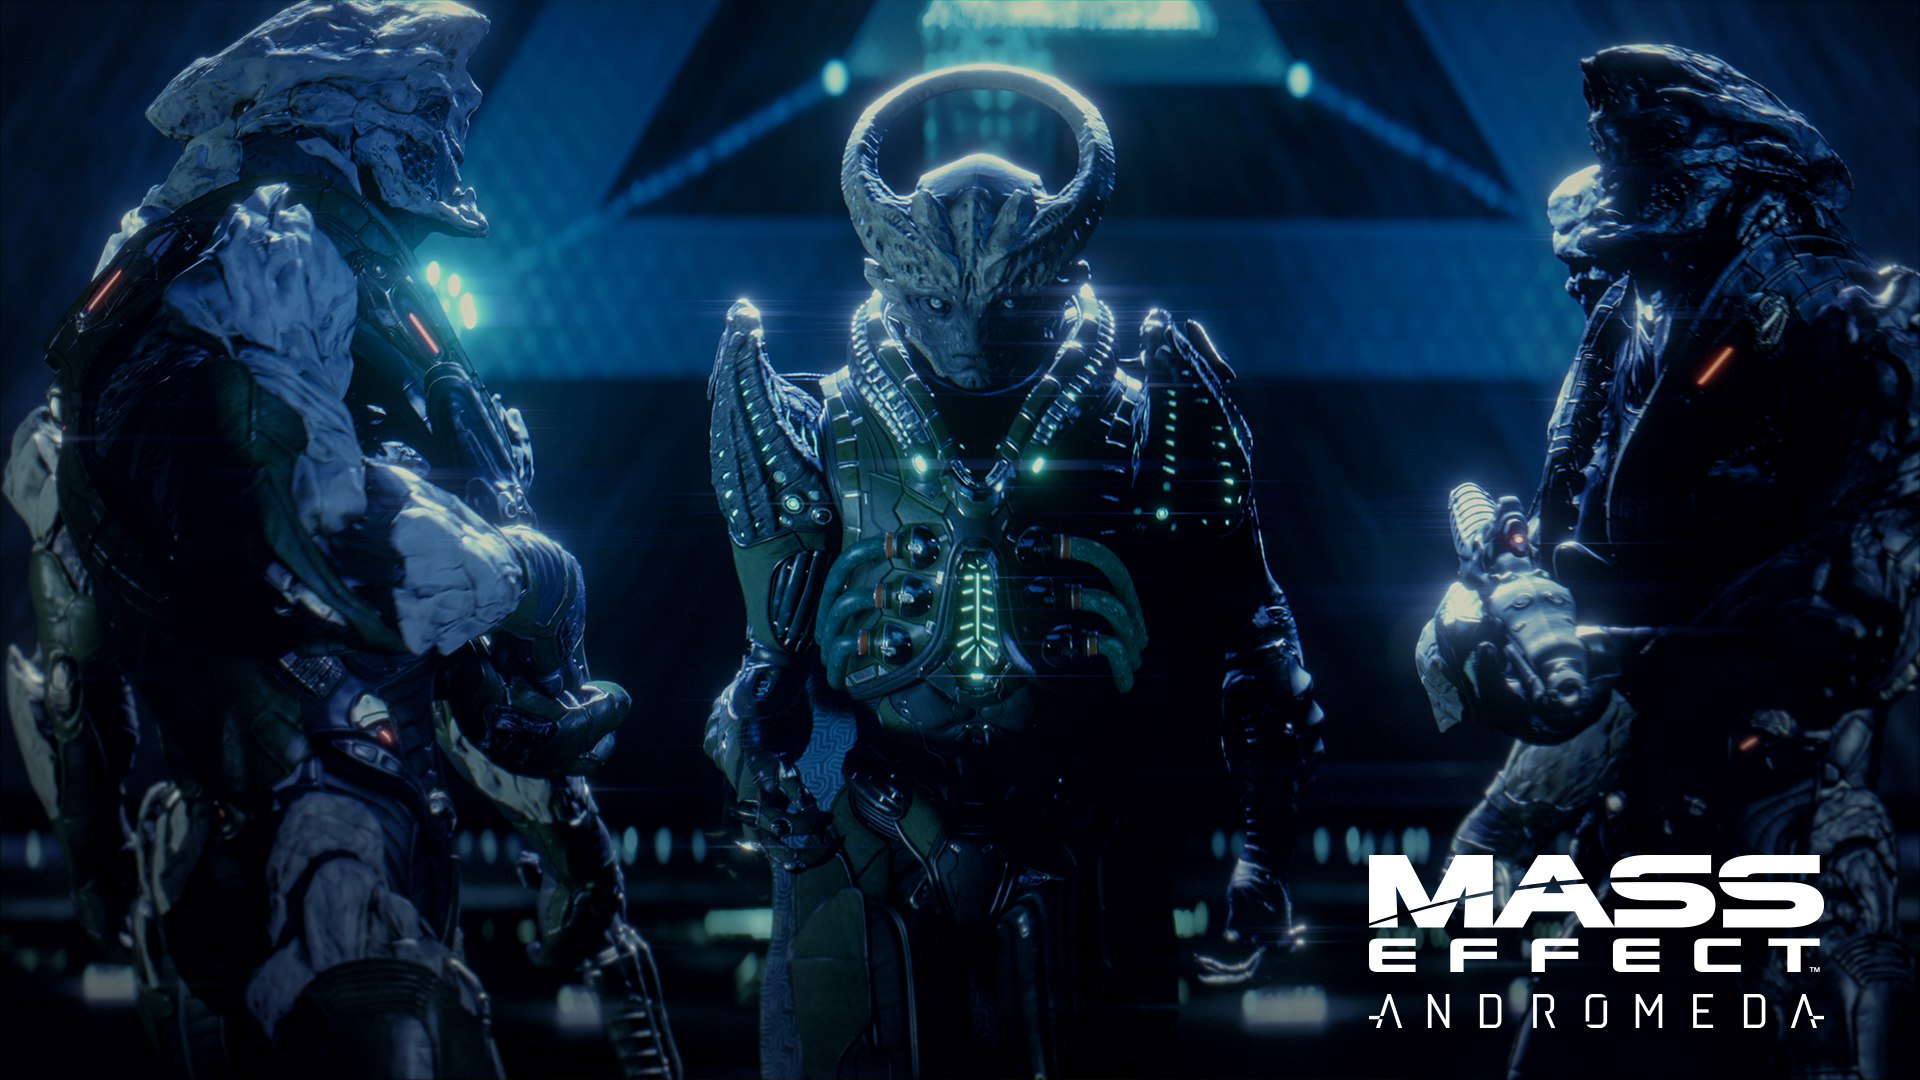 Mass Effect Andromeda Hd Wallpaper Background Image 1920x1080